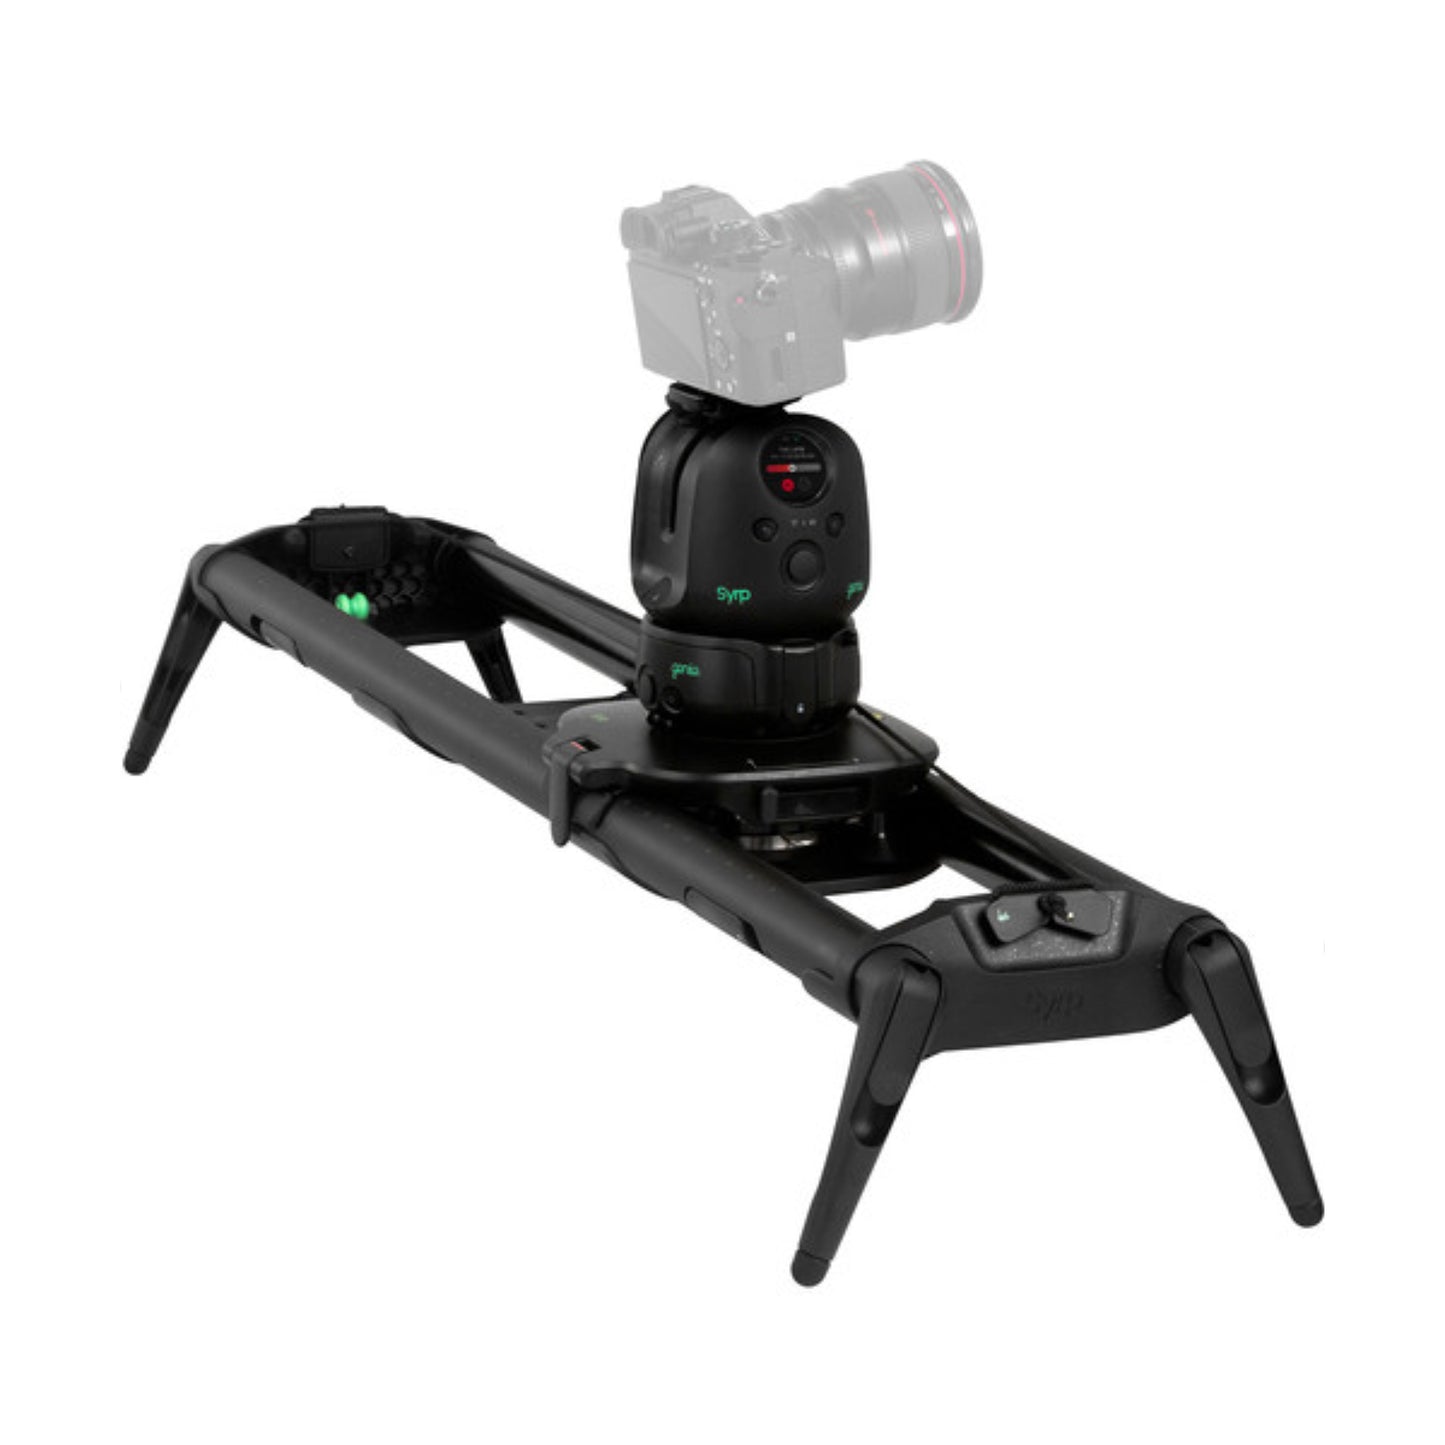 Buy Syrp Genie II 3-Axis Pro Slider Epic Kit | Topic Store